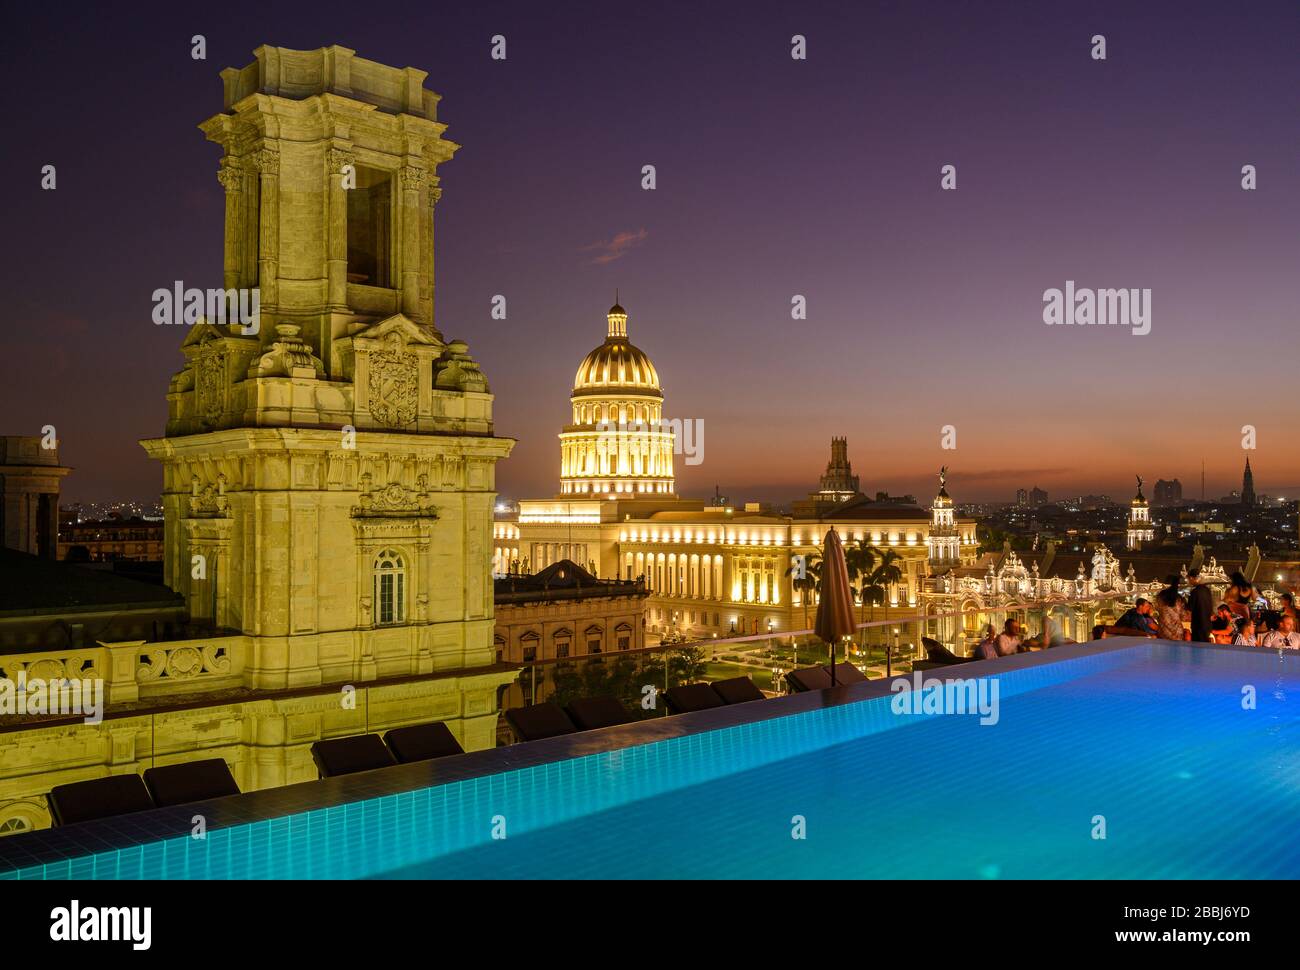 Rooftop view with infinity pool of El Capitolio, or the National Capitol Building, and Museo Nacional de Bellas Artes, from roof of Gran Hotel Manzana Kempinski, Havana, Cuba Stock Photo